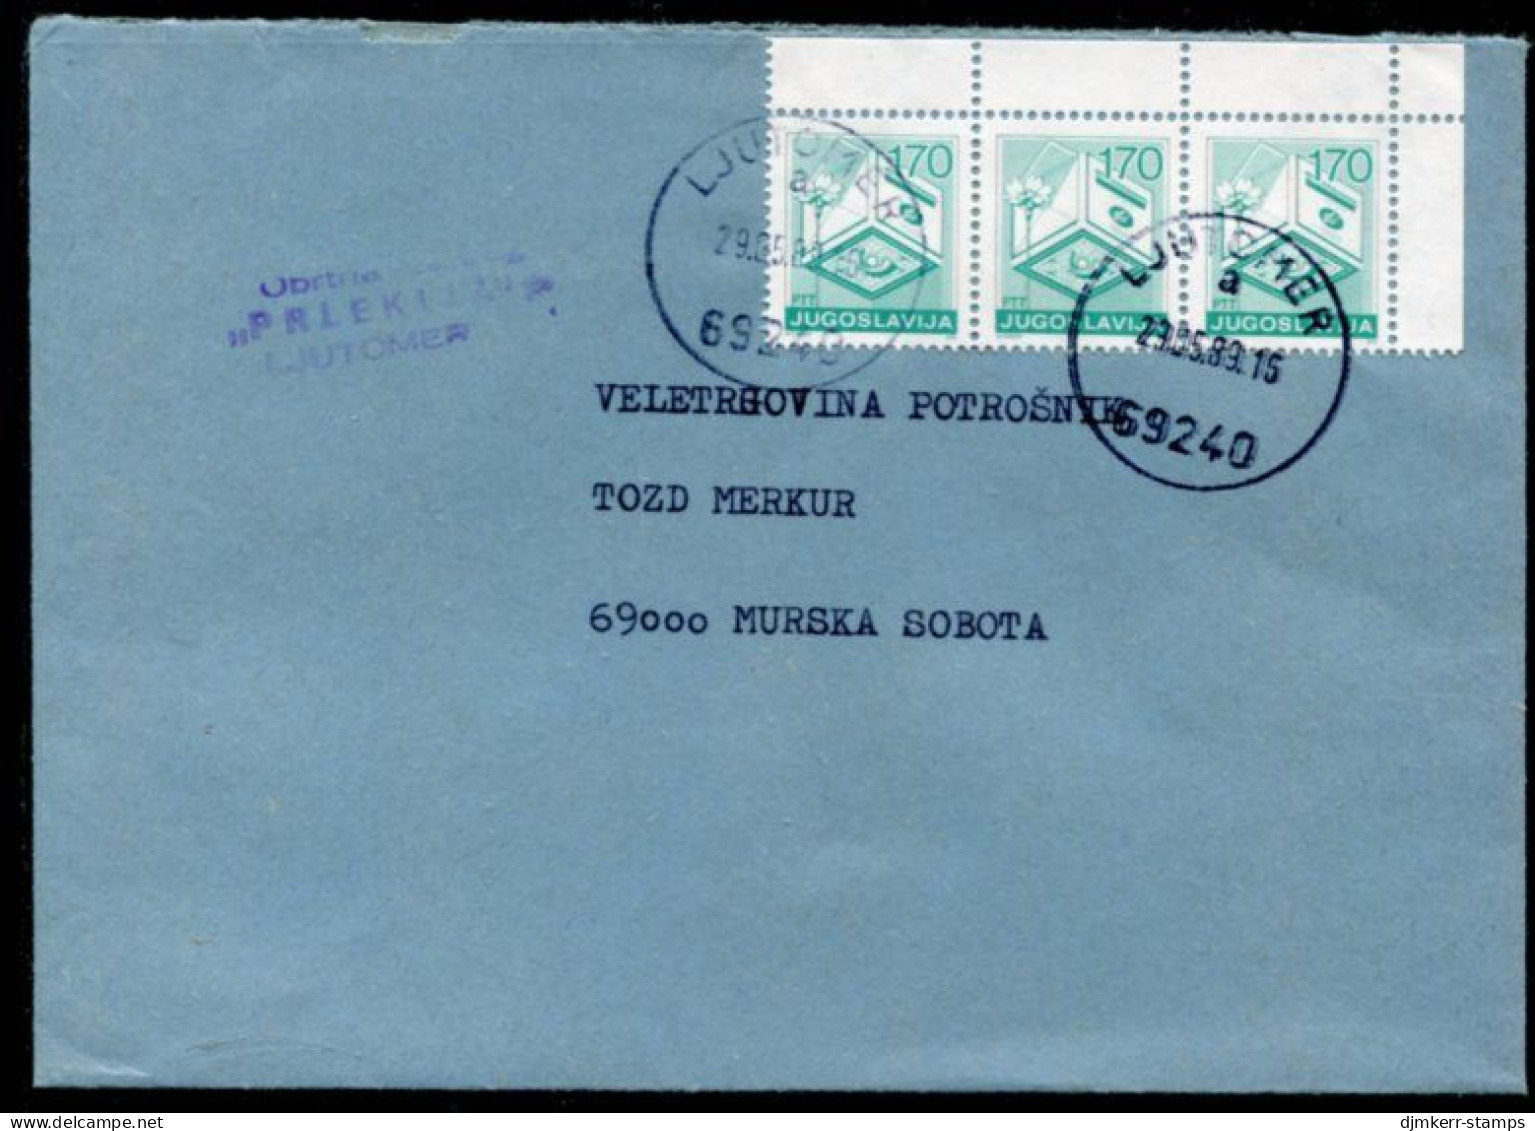 YUGOSLAVIA 1989 Cover Franked With Postal Services 170 D X 3. Michel 2313 - Storia Postale